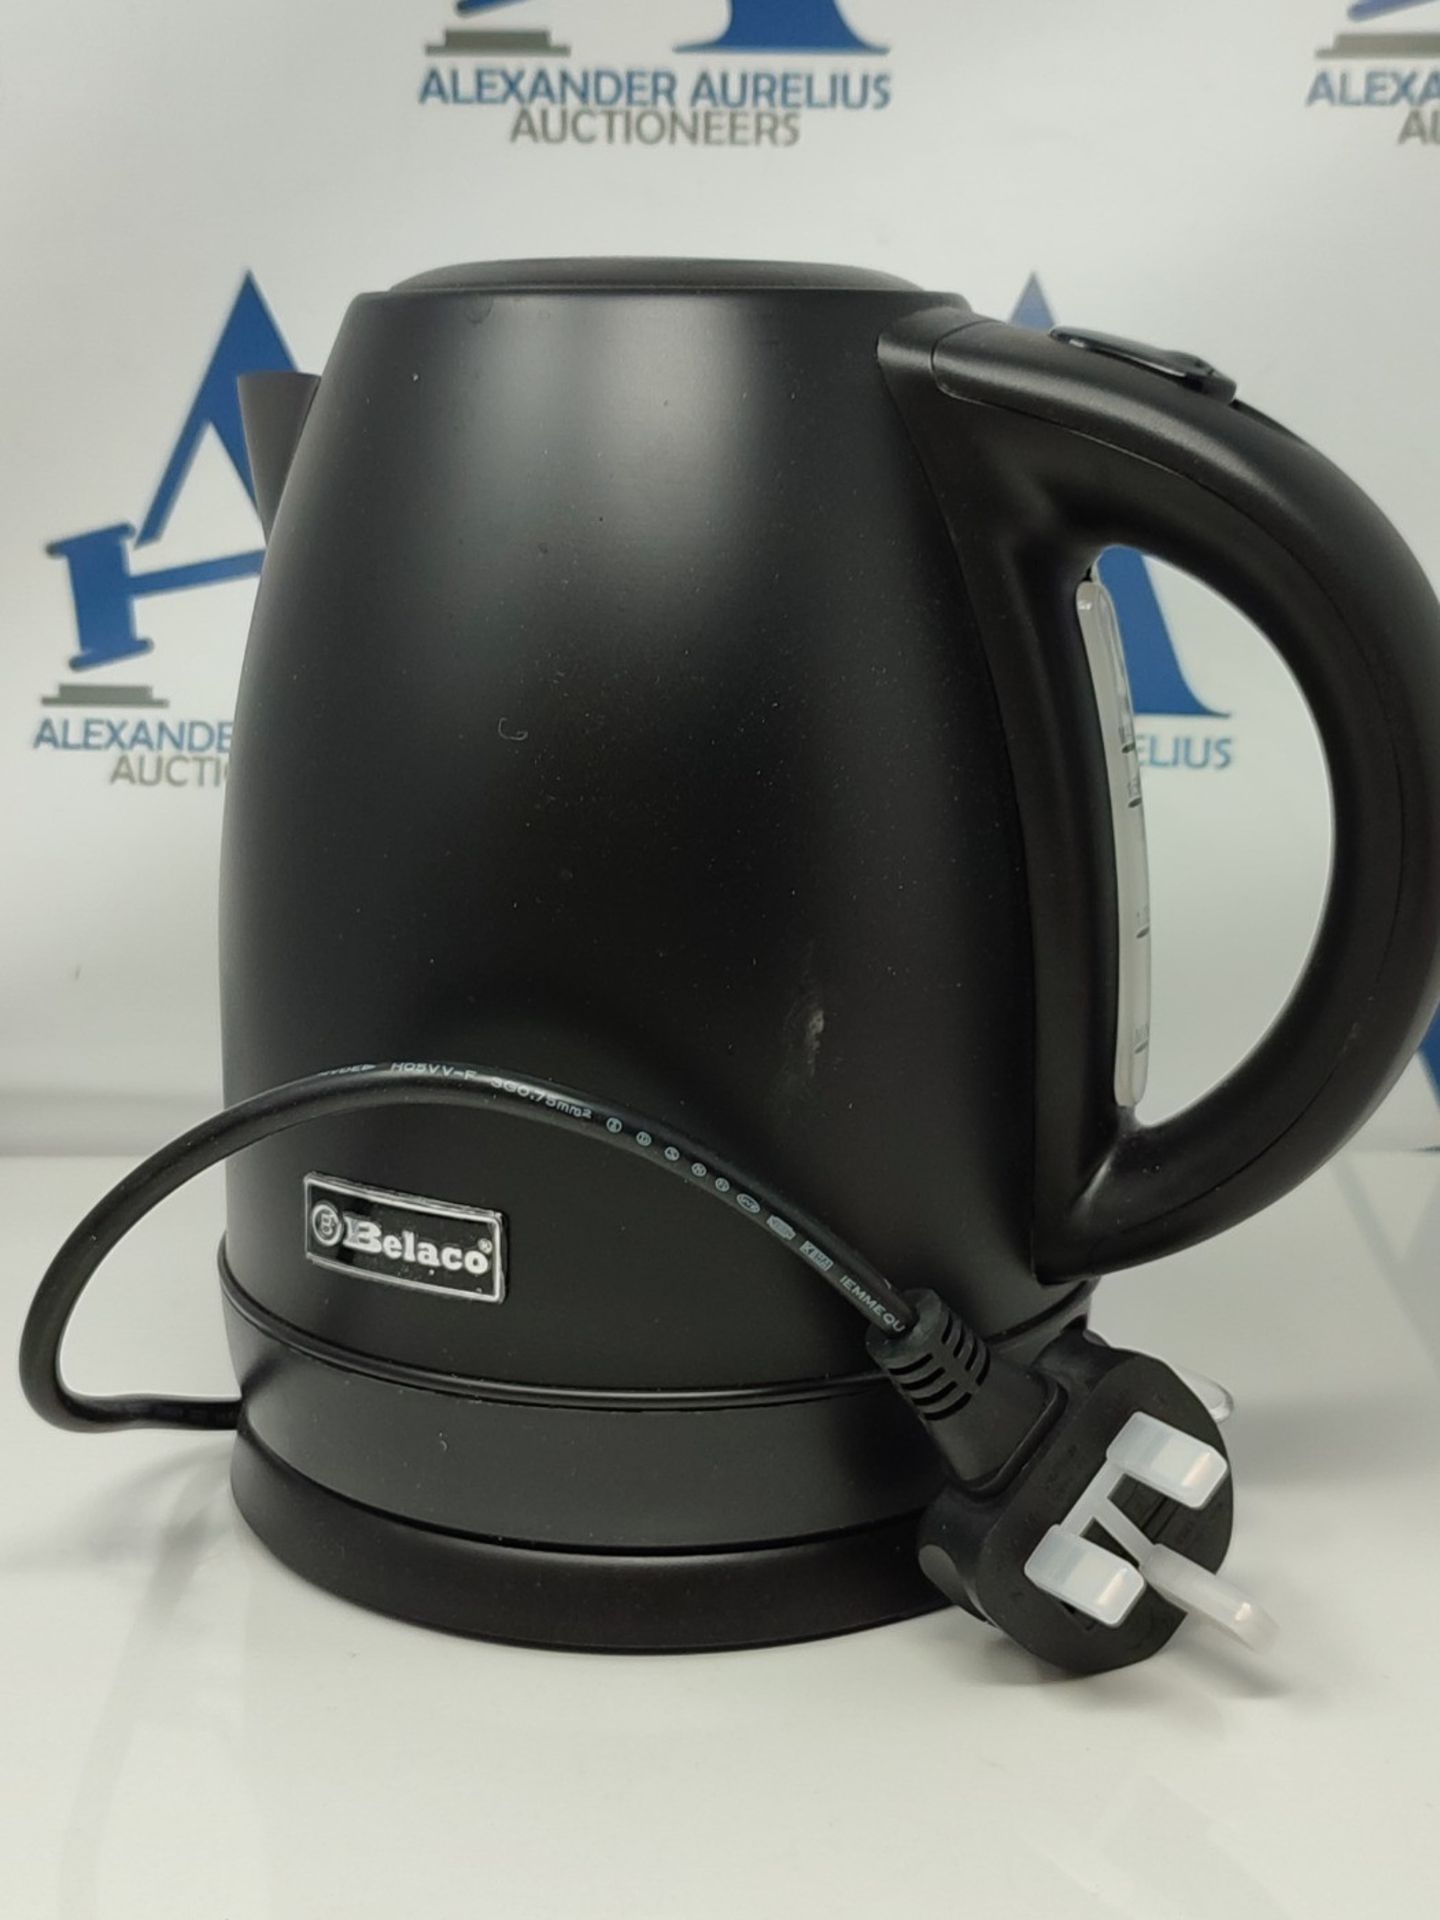 Belaco Electric Kettle Stainless Steel Housing 1.7L Fast Boil Cordless 360° Rotation - Image 2 of 2